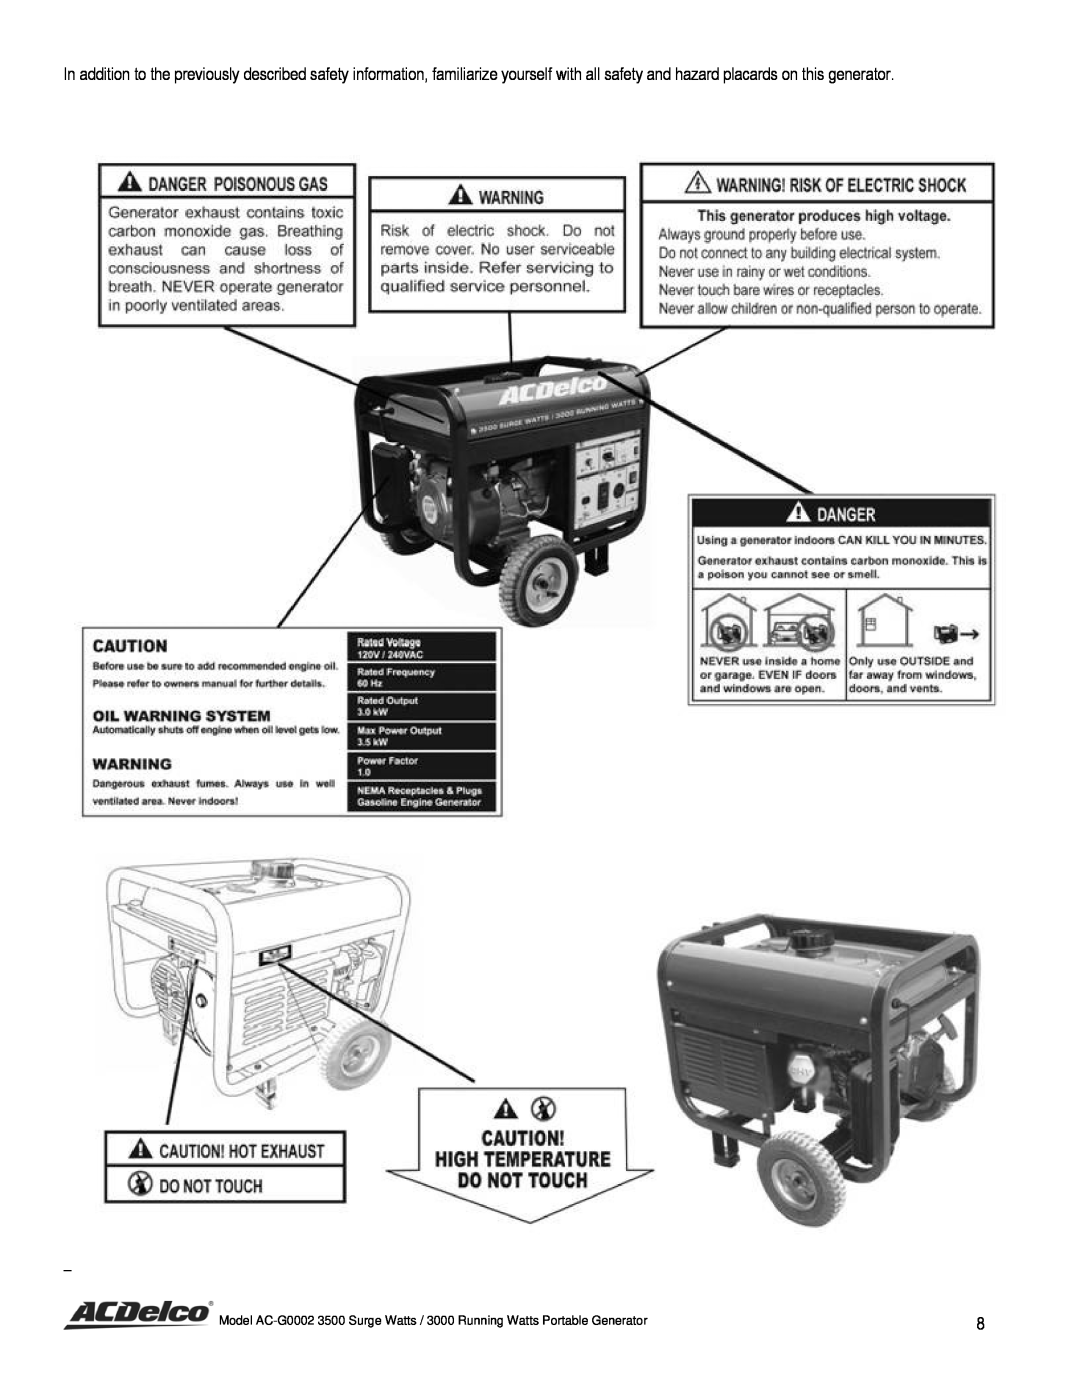 ACDelco AC-G0002 instruction manual 